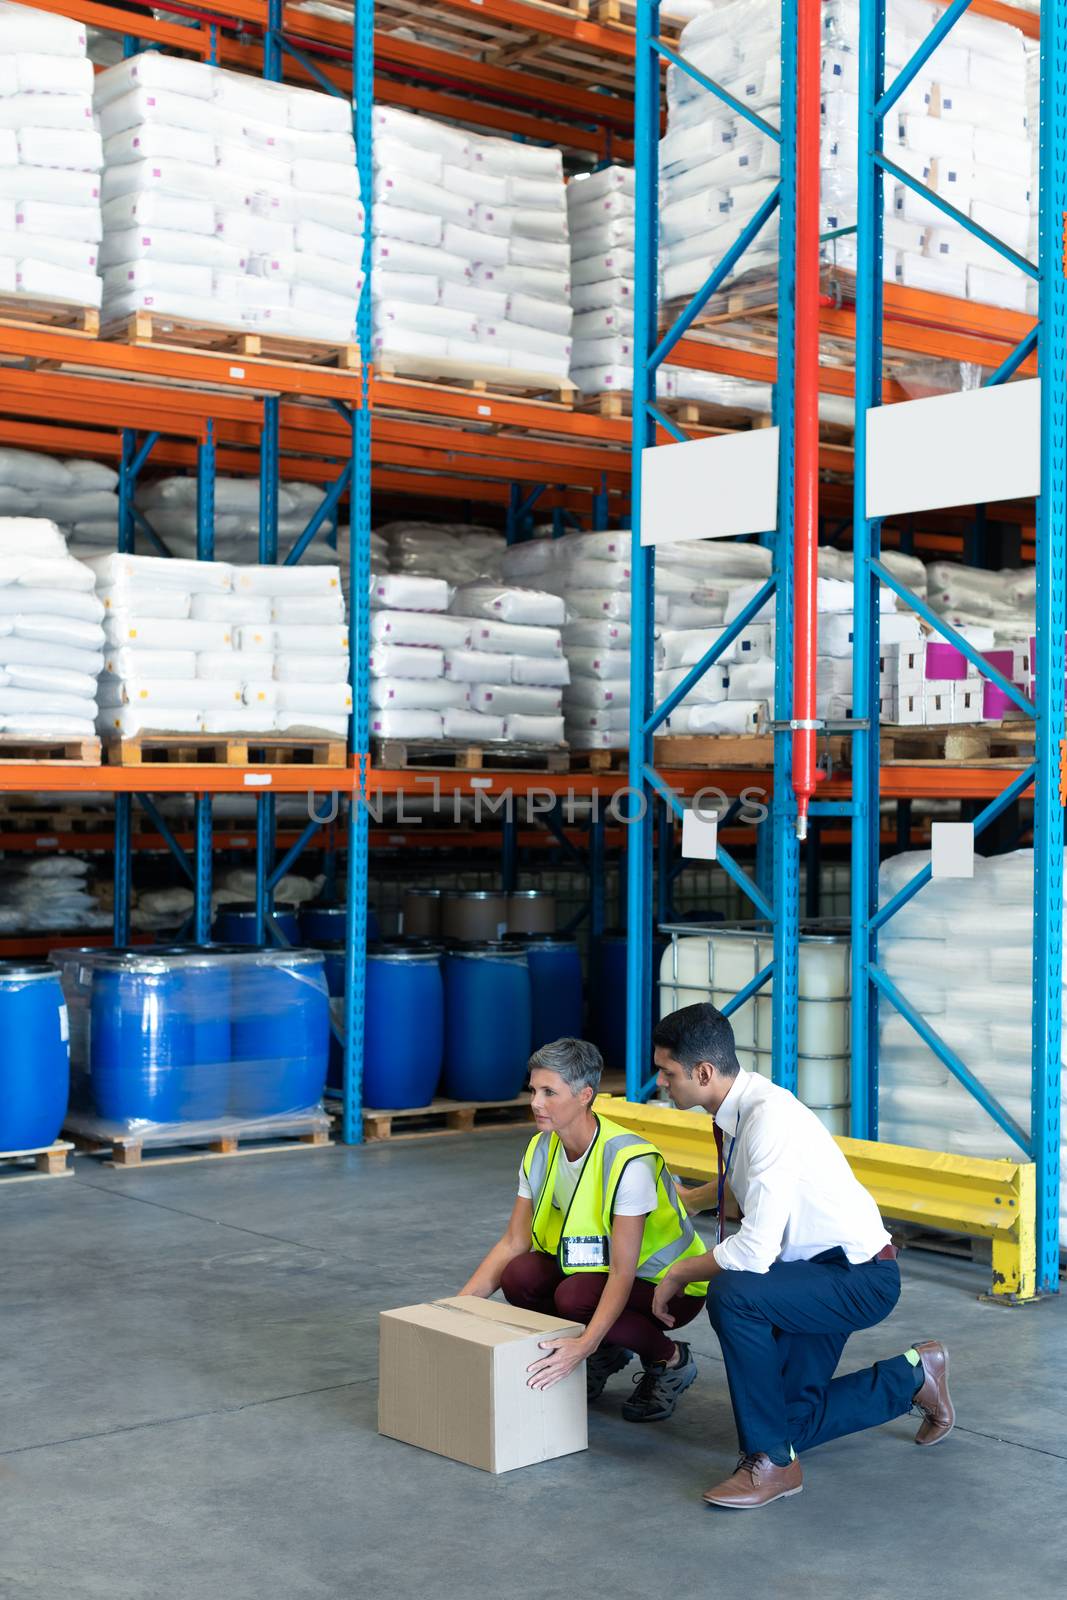 Male staff giving training to female staff in warehouse by Wavebreakmedia